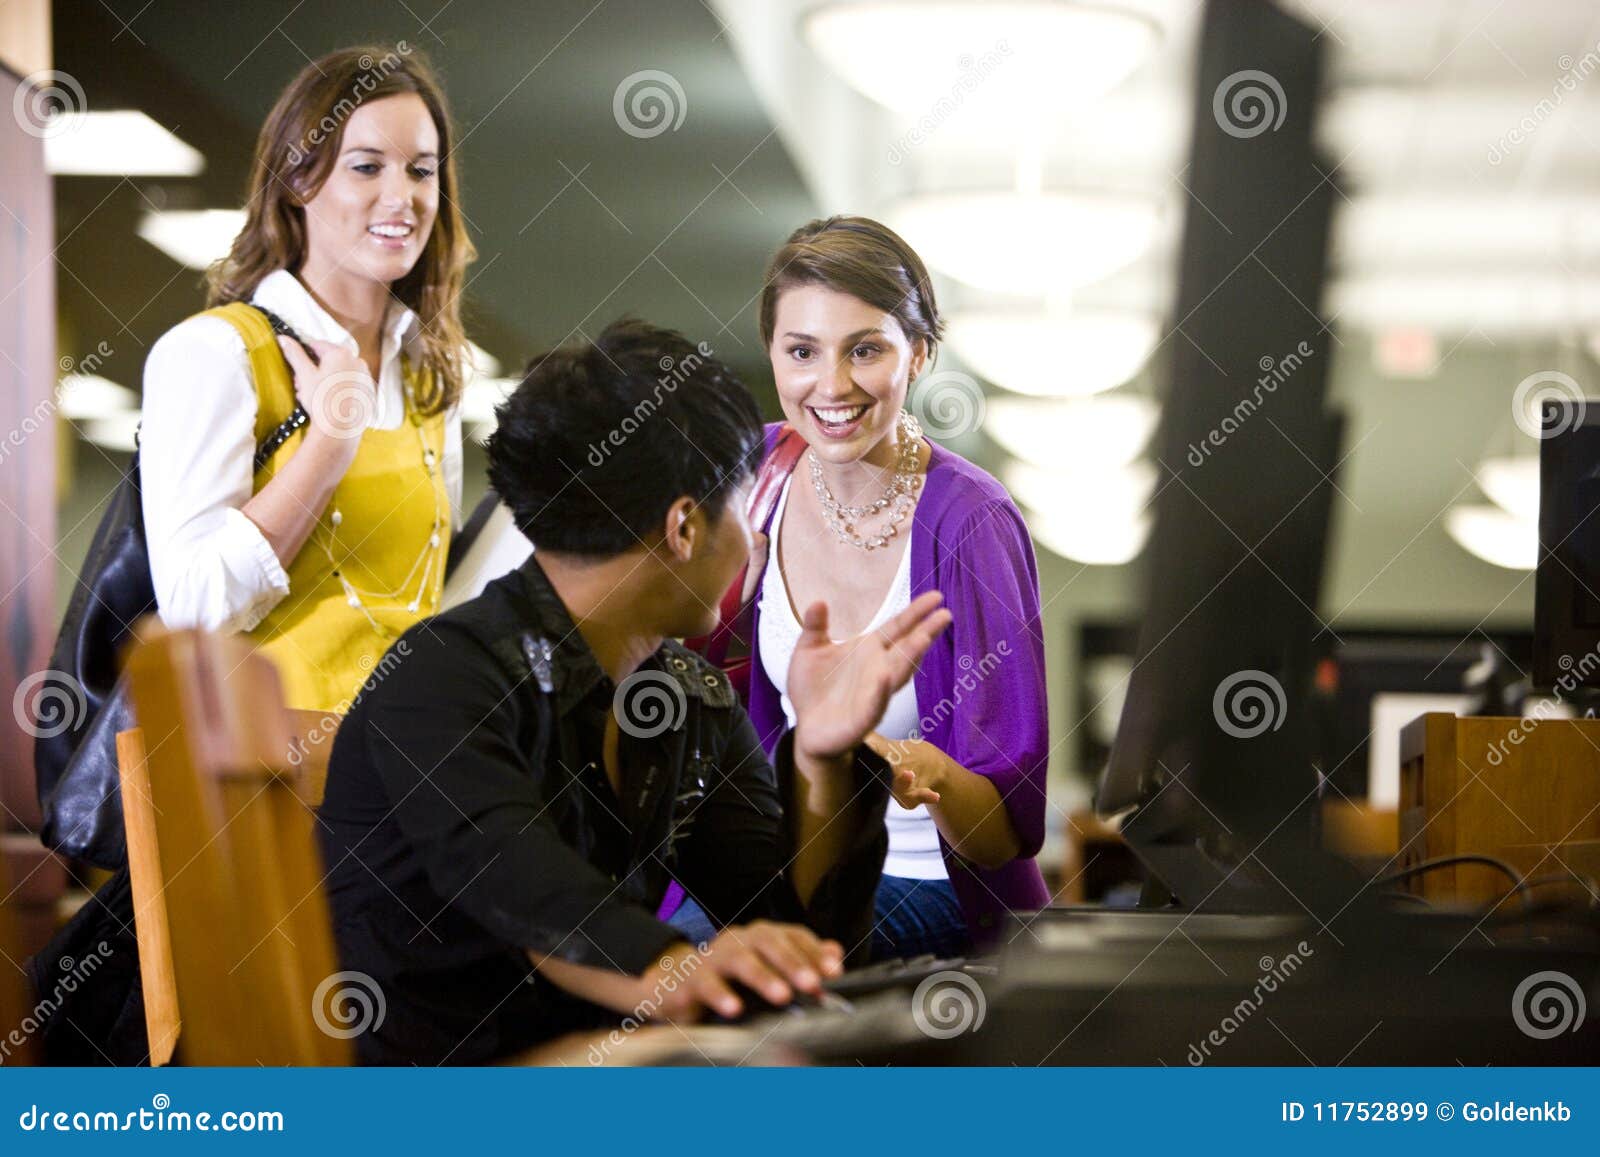 university students conversing by library computer